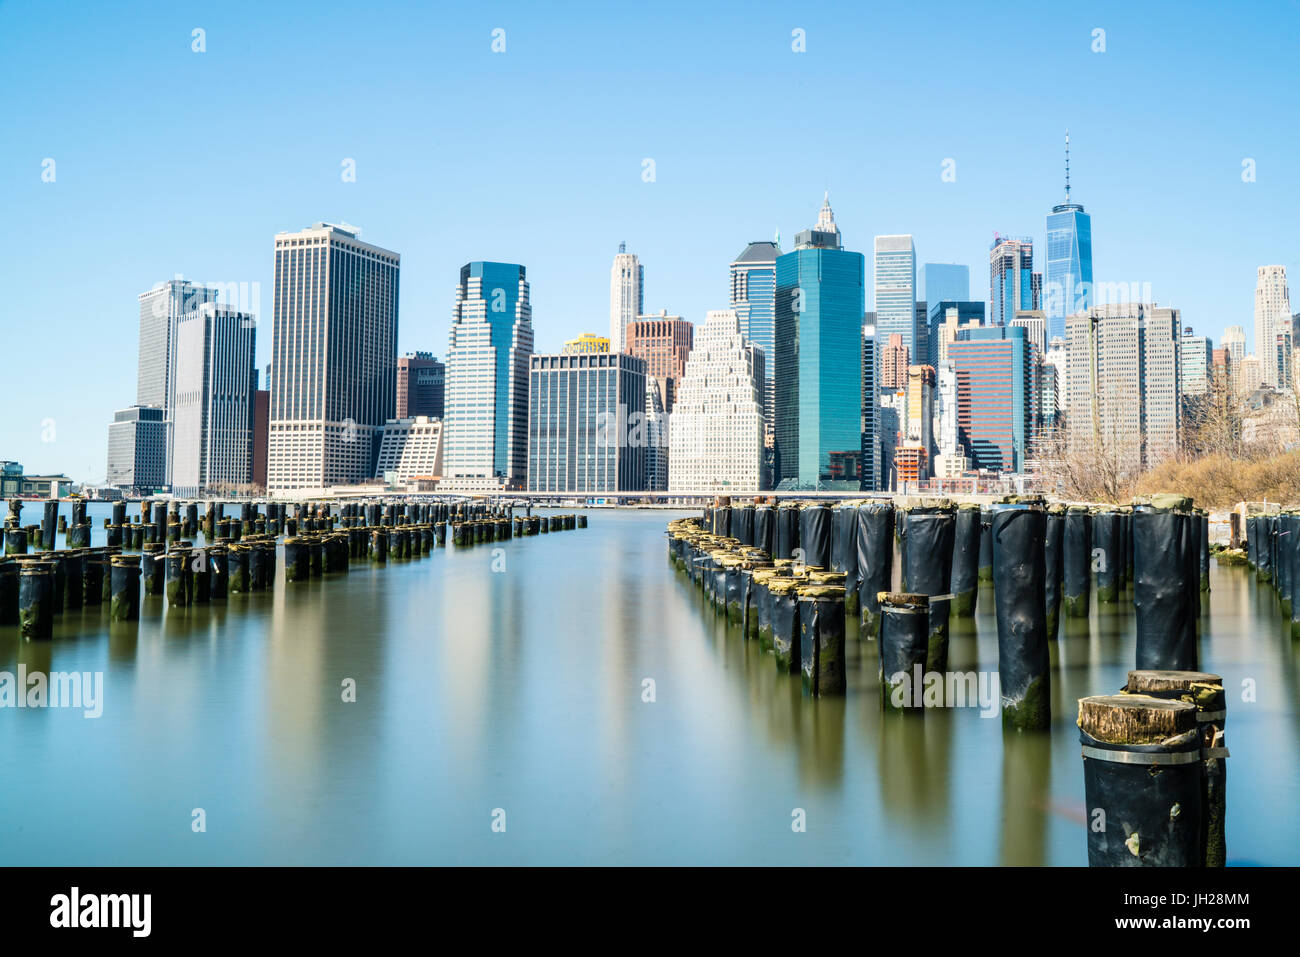 Lower Manhattan skyline viewed from Brooklyn side of East River, New York City, United States of America, North America Stock Photo